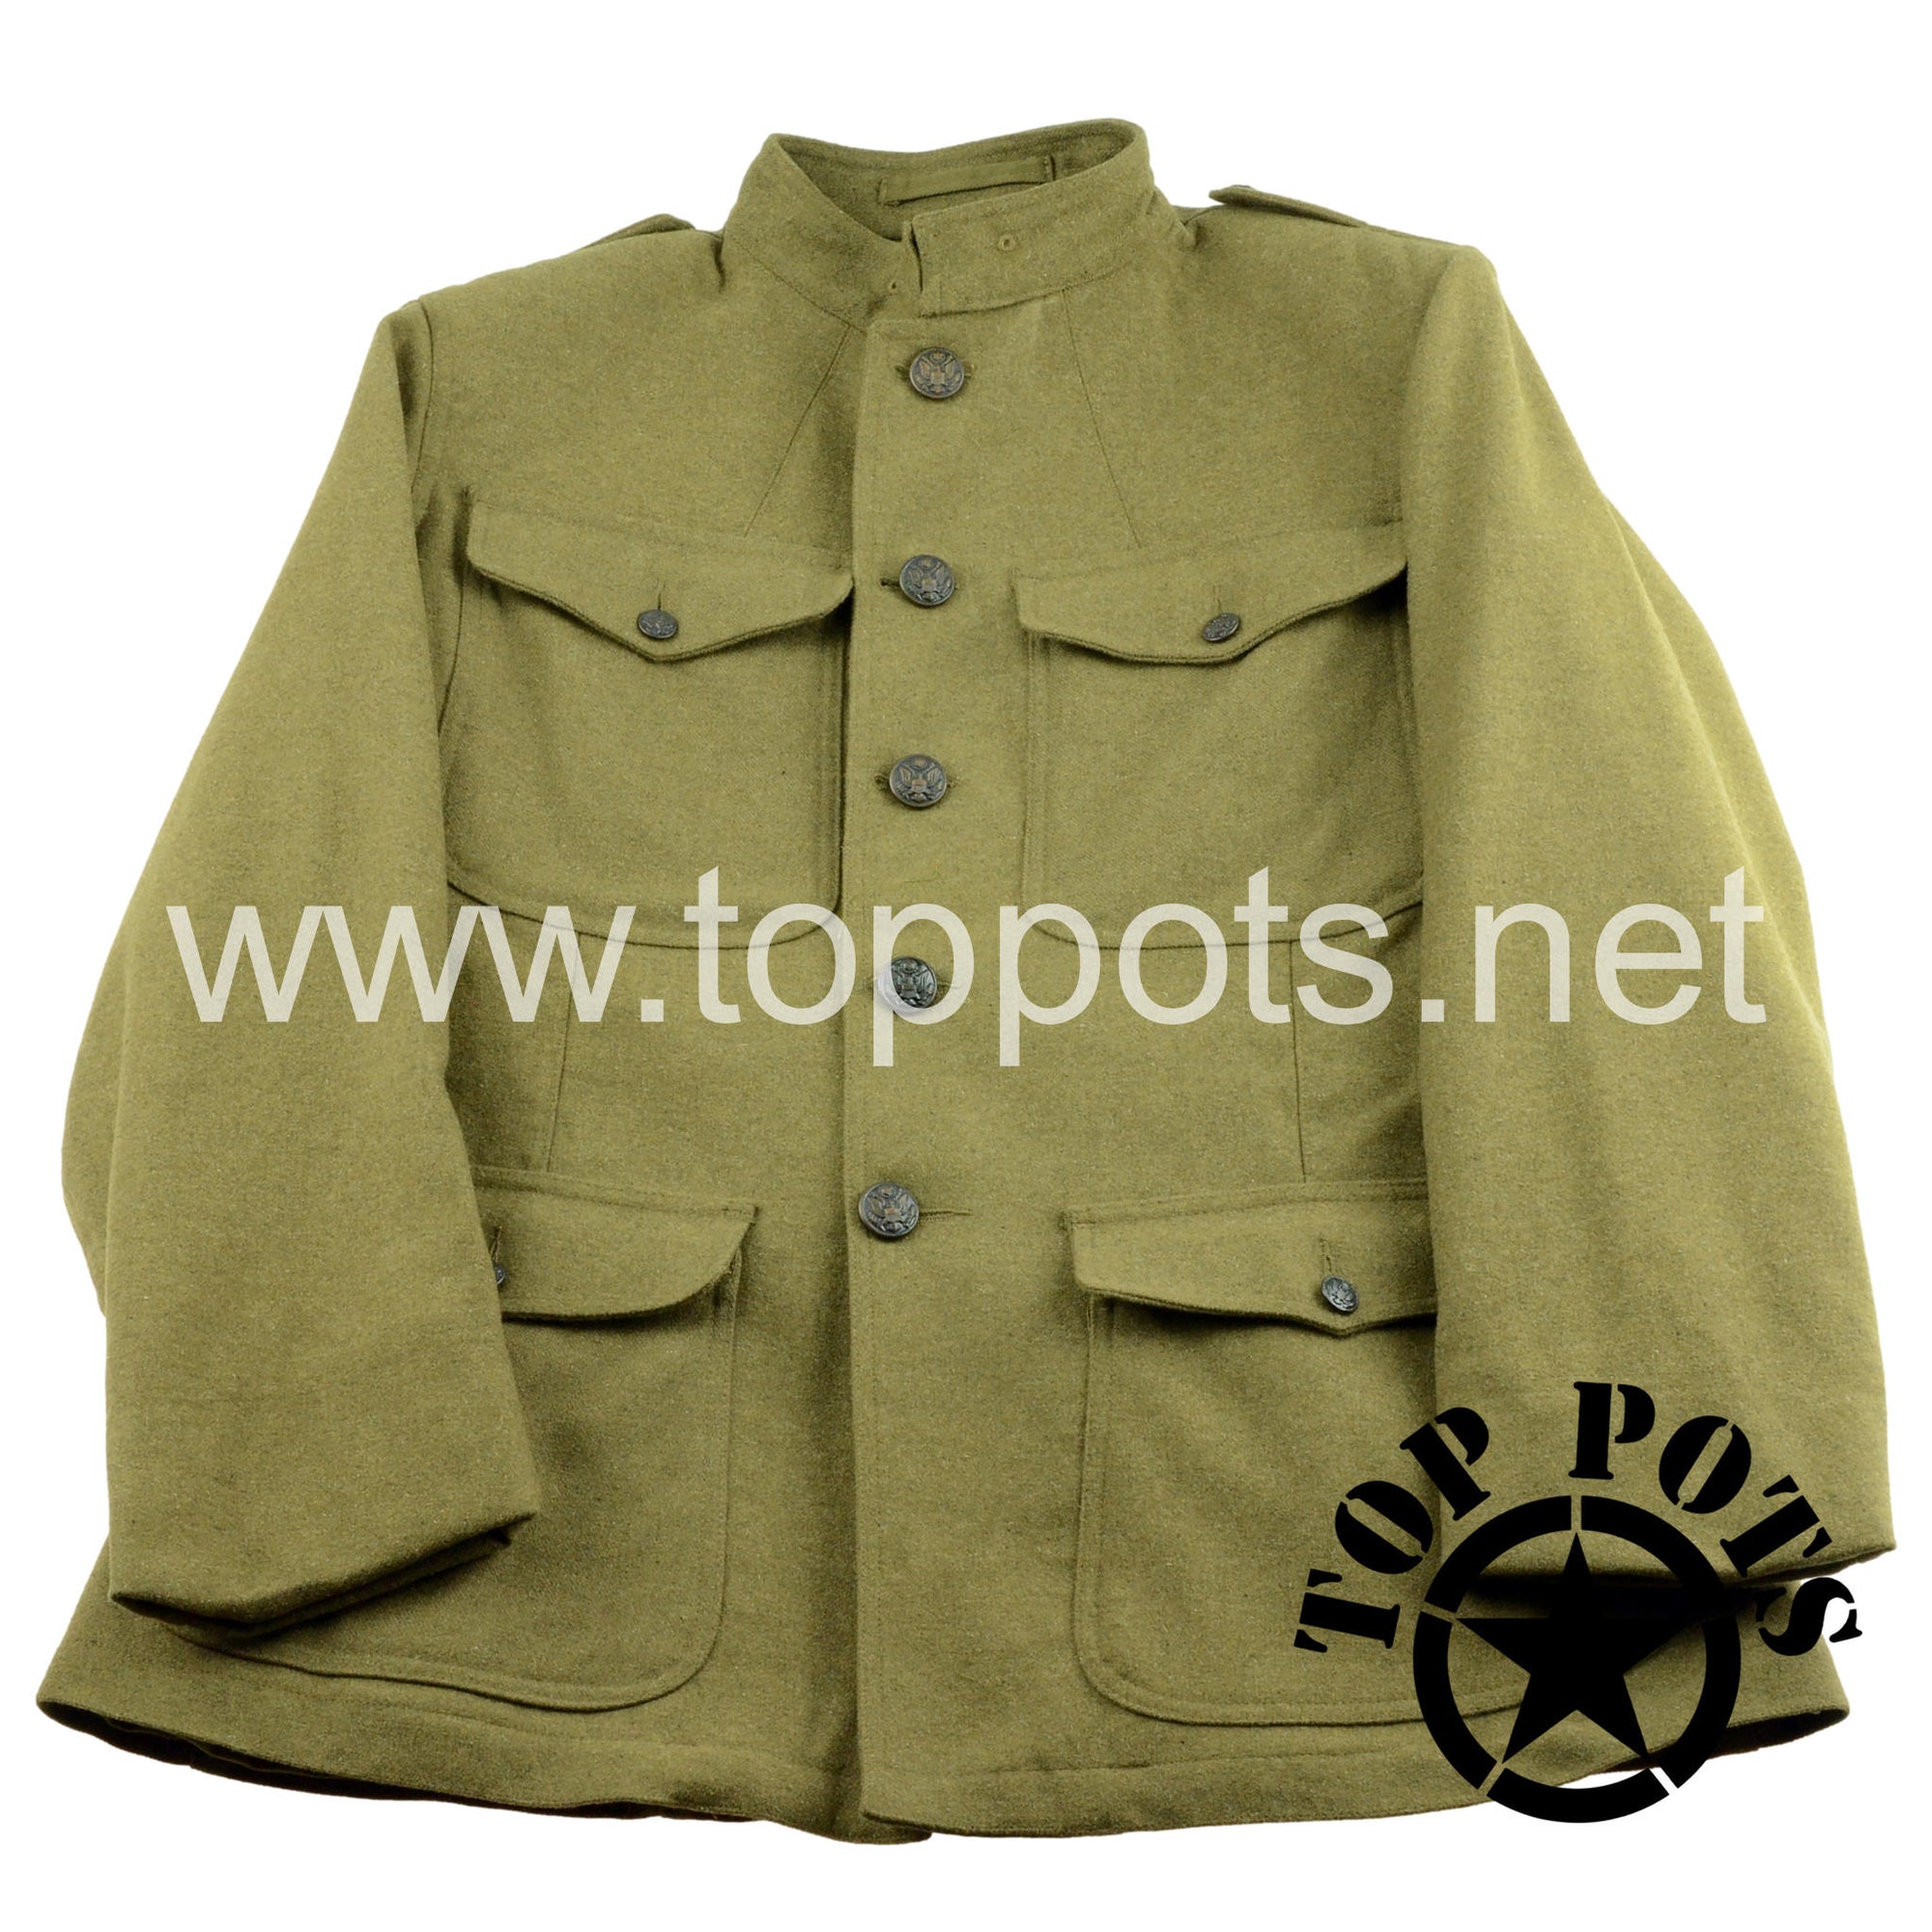 WWI US Army Reproduction American Doughboy M1917 Wool Enlisted Uniform Service Coat Jacket – Coat, Wool, OD, M1917